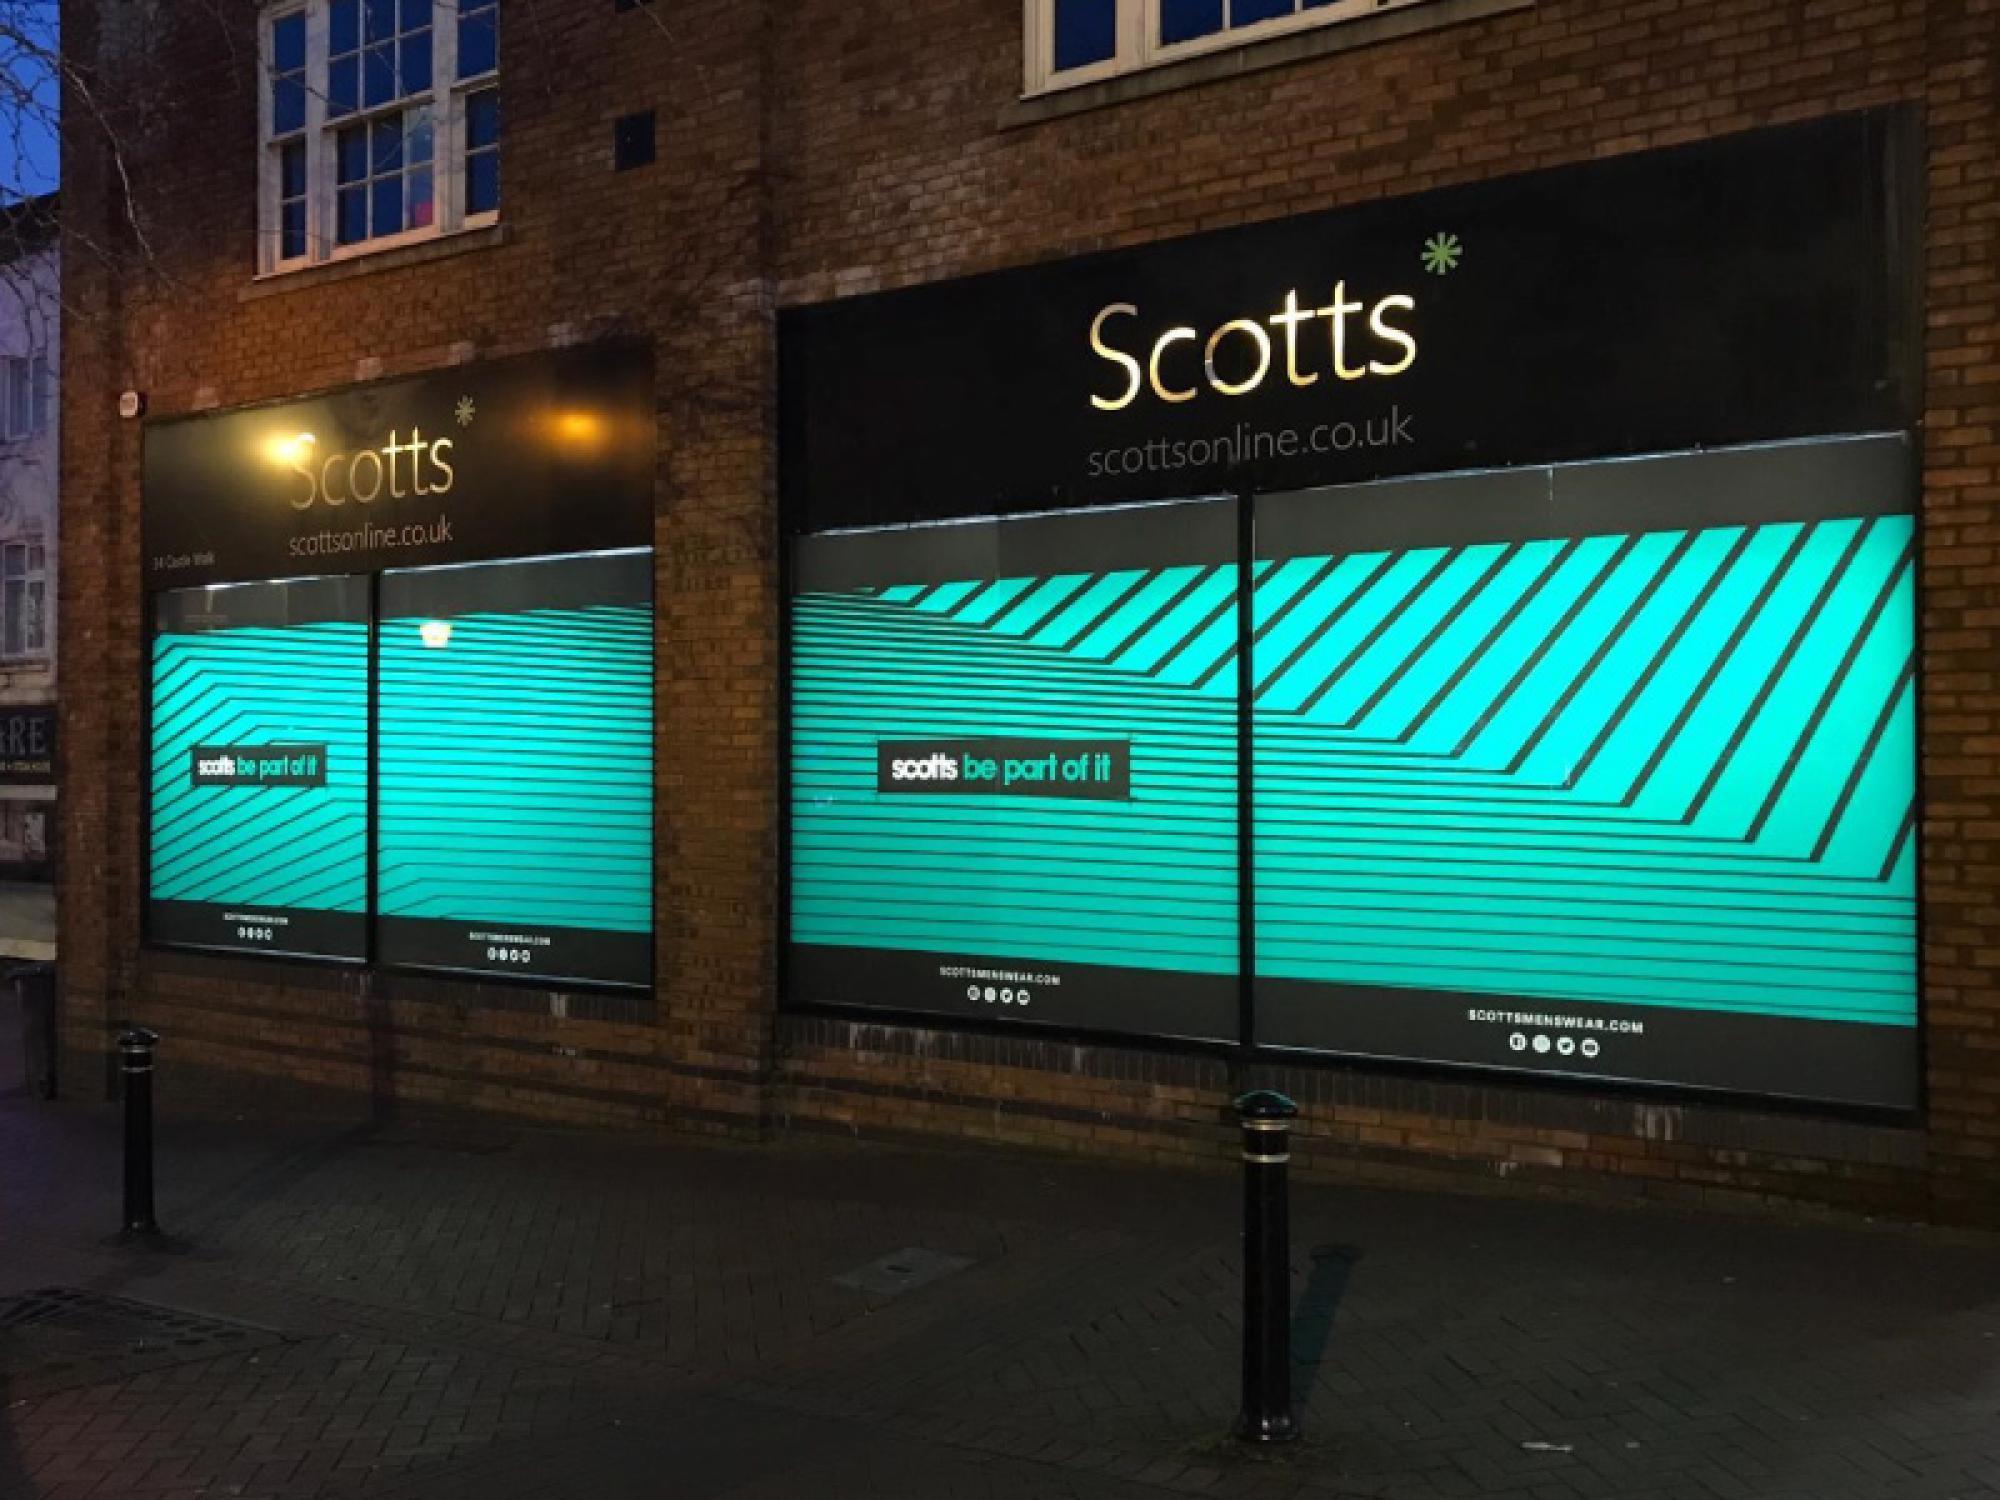 Retail graphics installation in Manchester for high-street retailers to kick-start trade in 2022